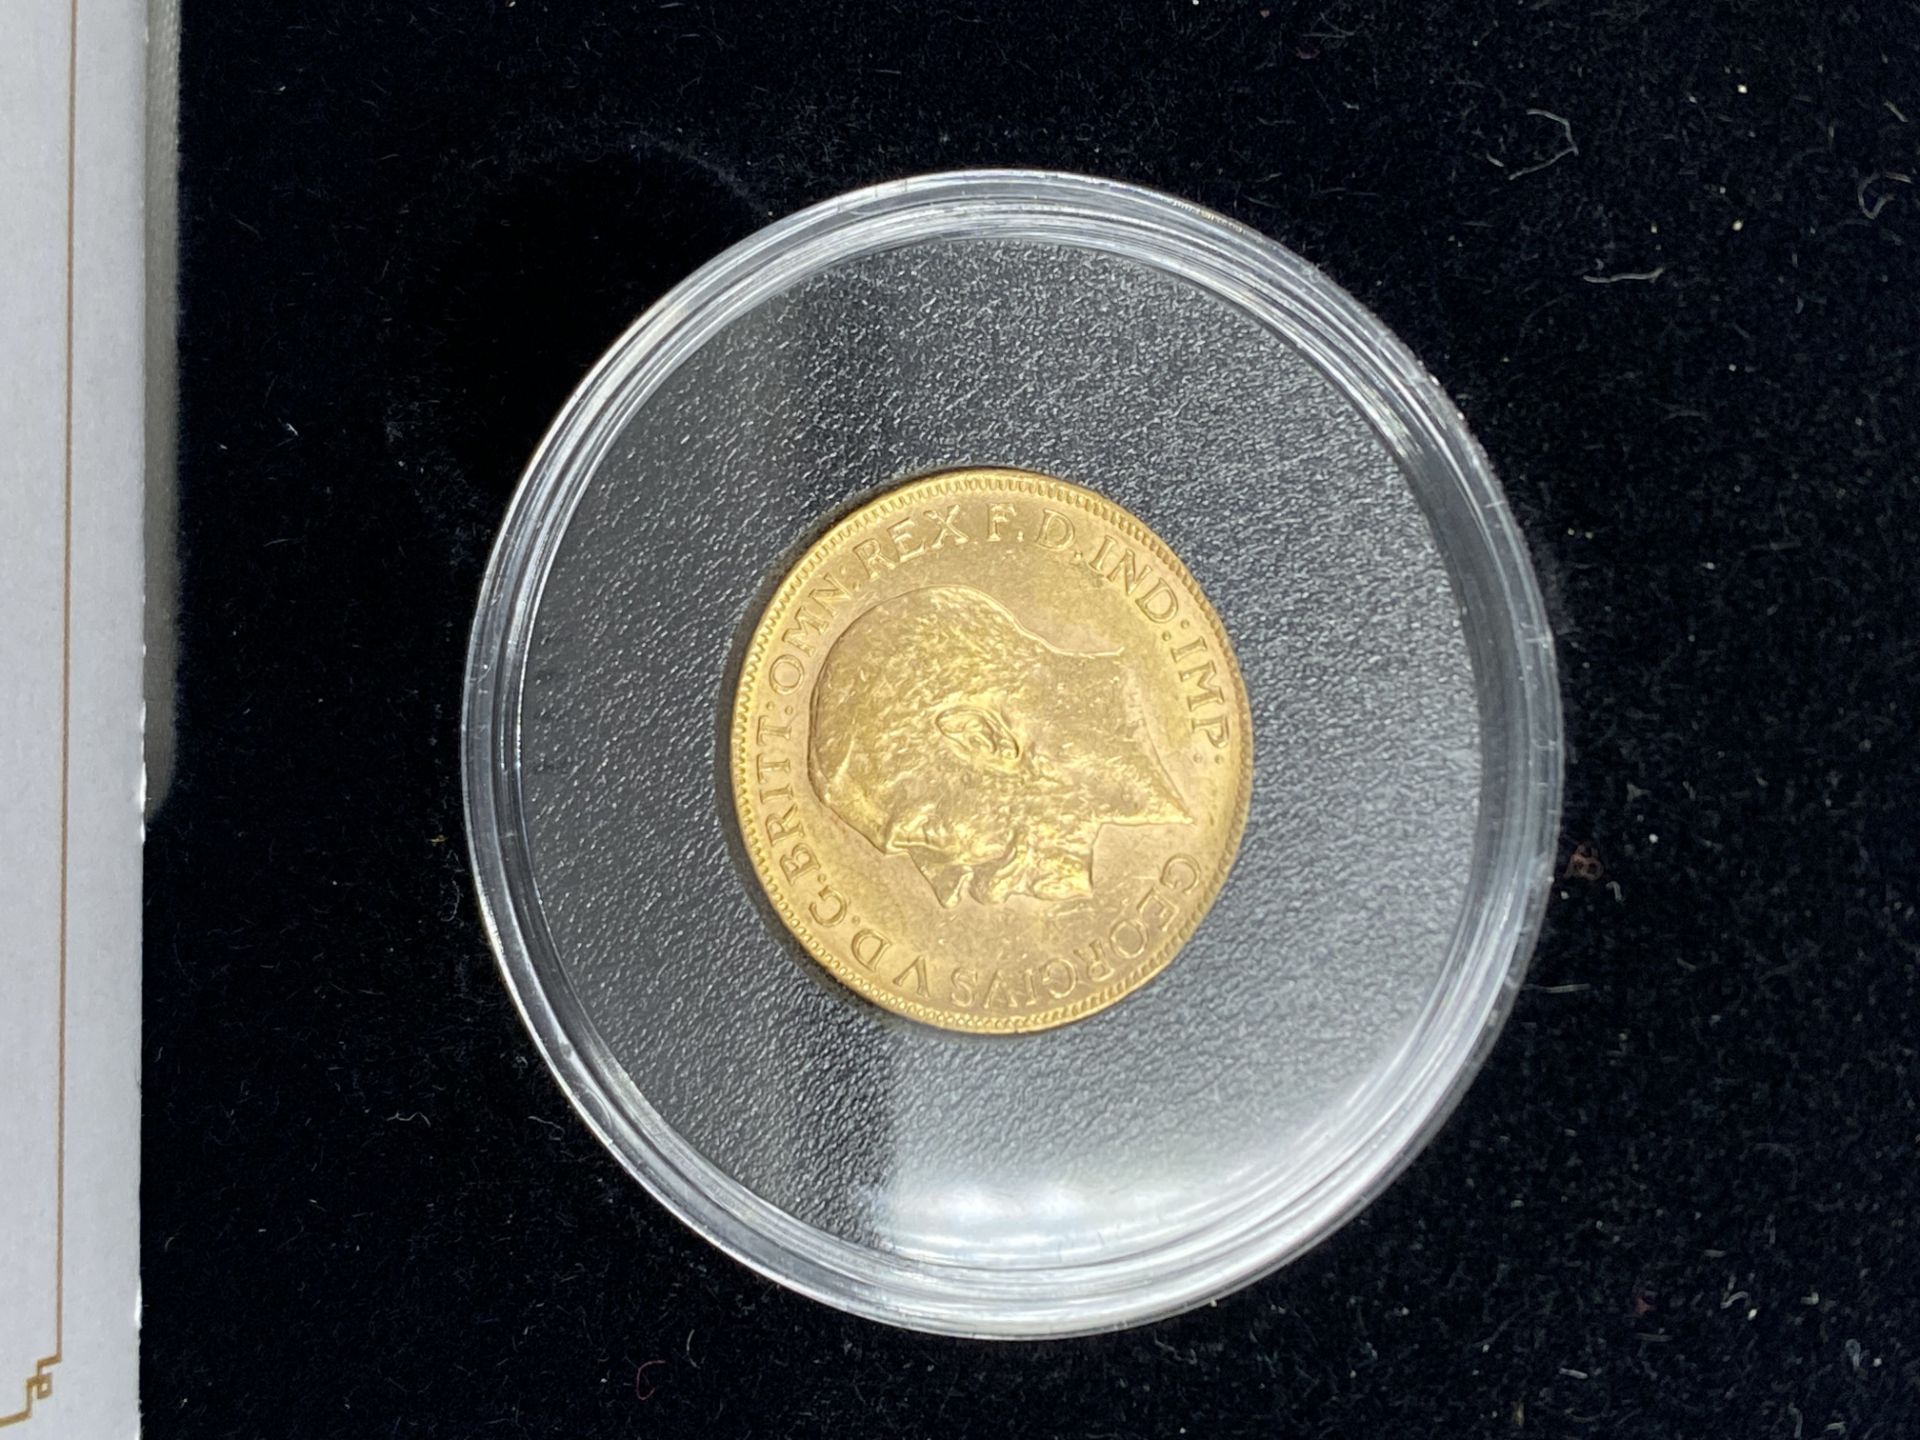 Jubilee Mint - Queen's 95th Birthday Gold Sovereign Pair - Image 2 of 5